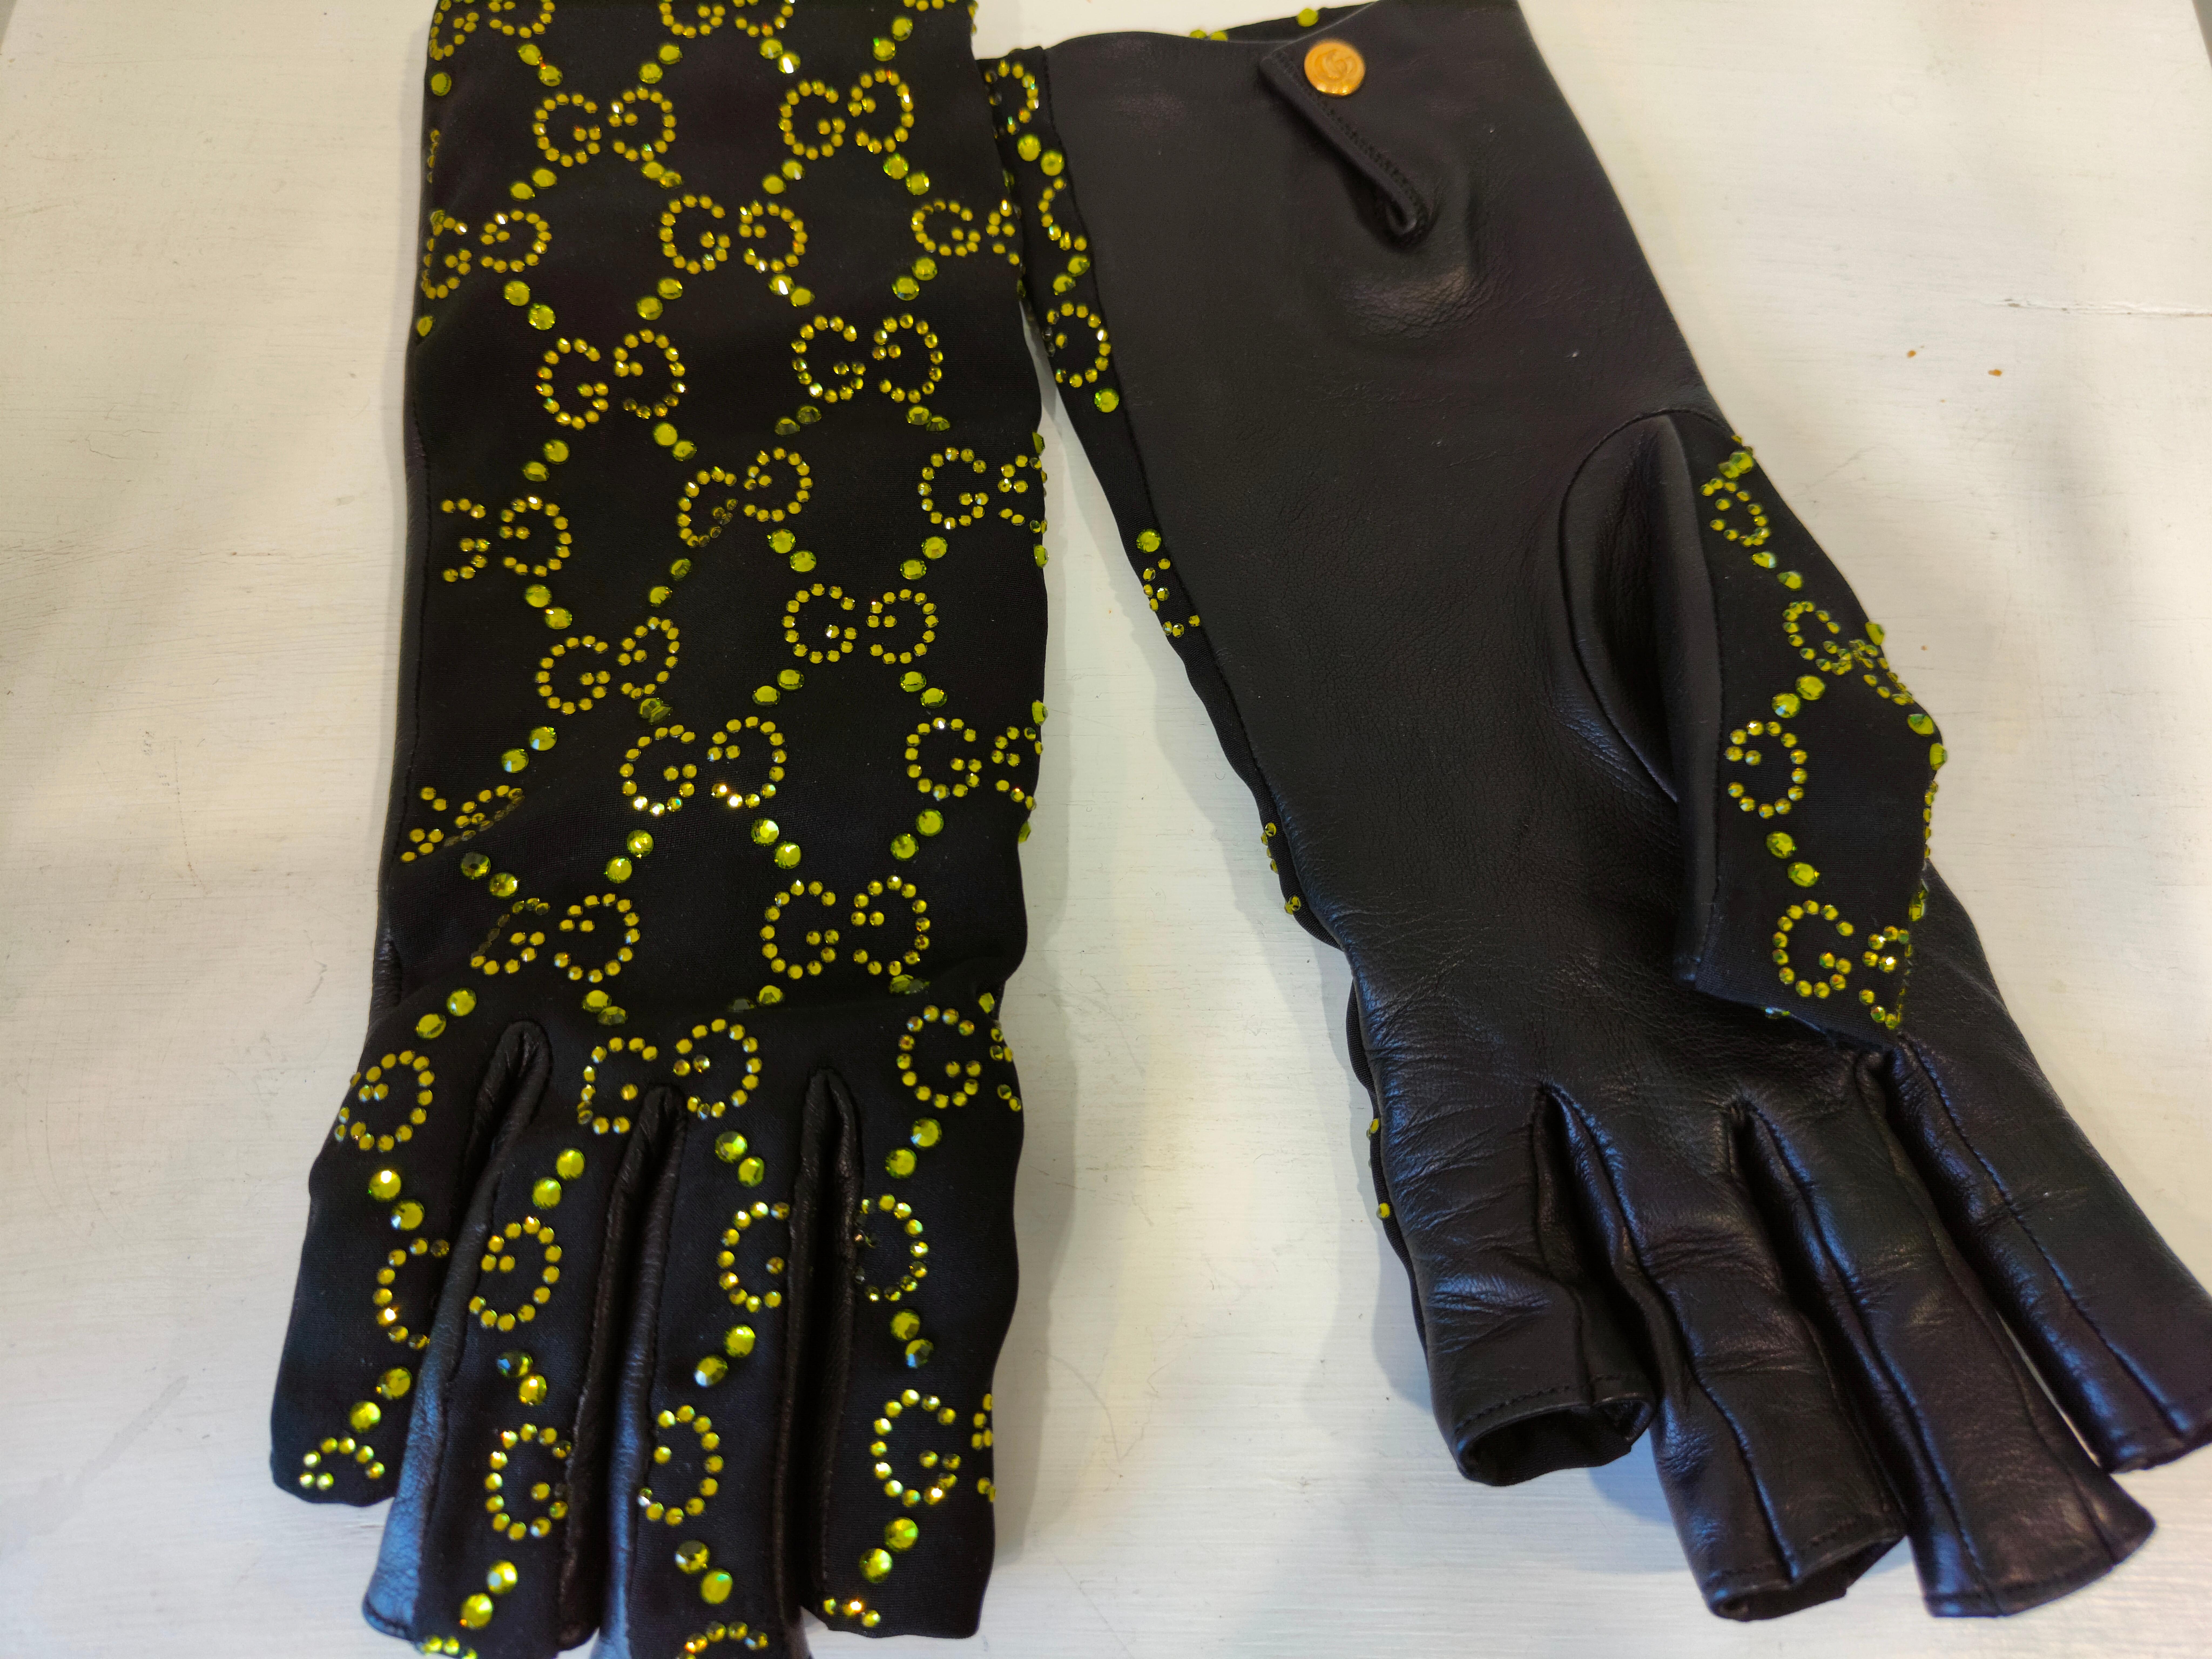 Gucci for Billie Eilish limited edition black leather green Swarovski gloves In Excellent Condition For Sale In Capri, IT